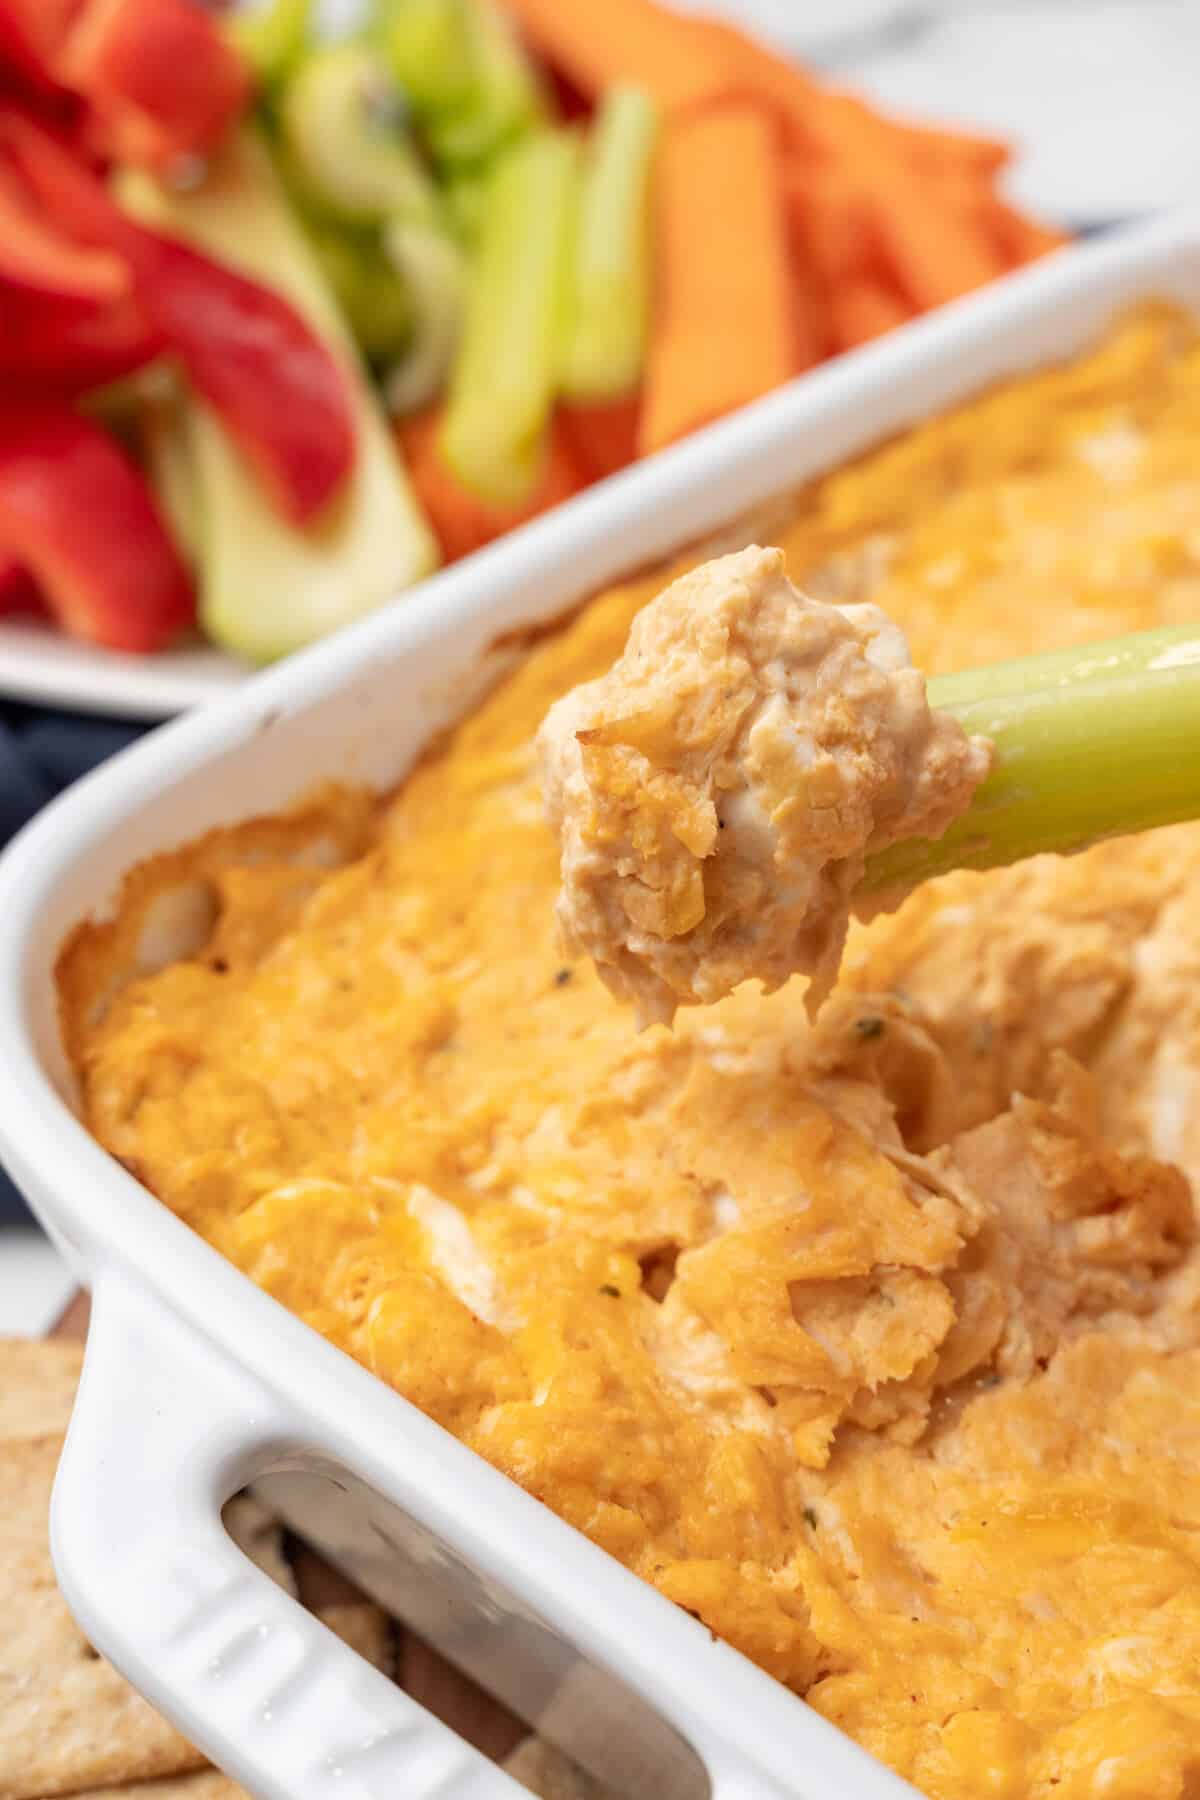 A Buffalo Chicken Dip being dipped into a dish with celery.